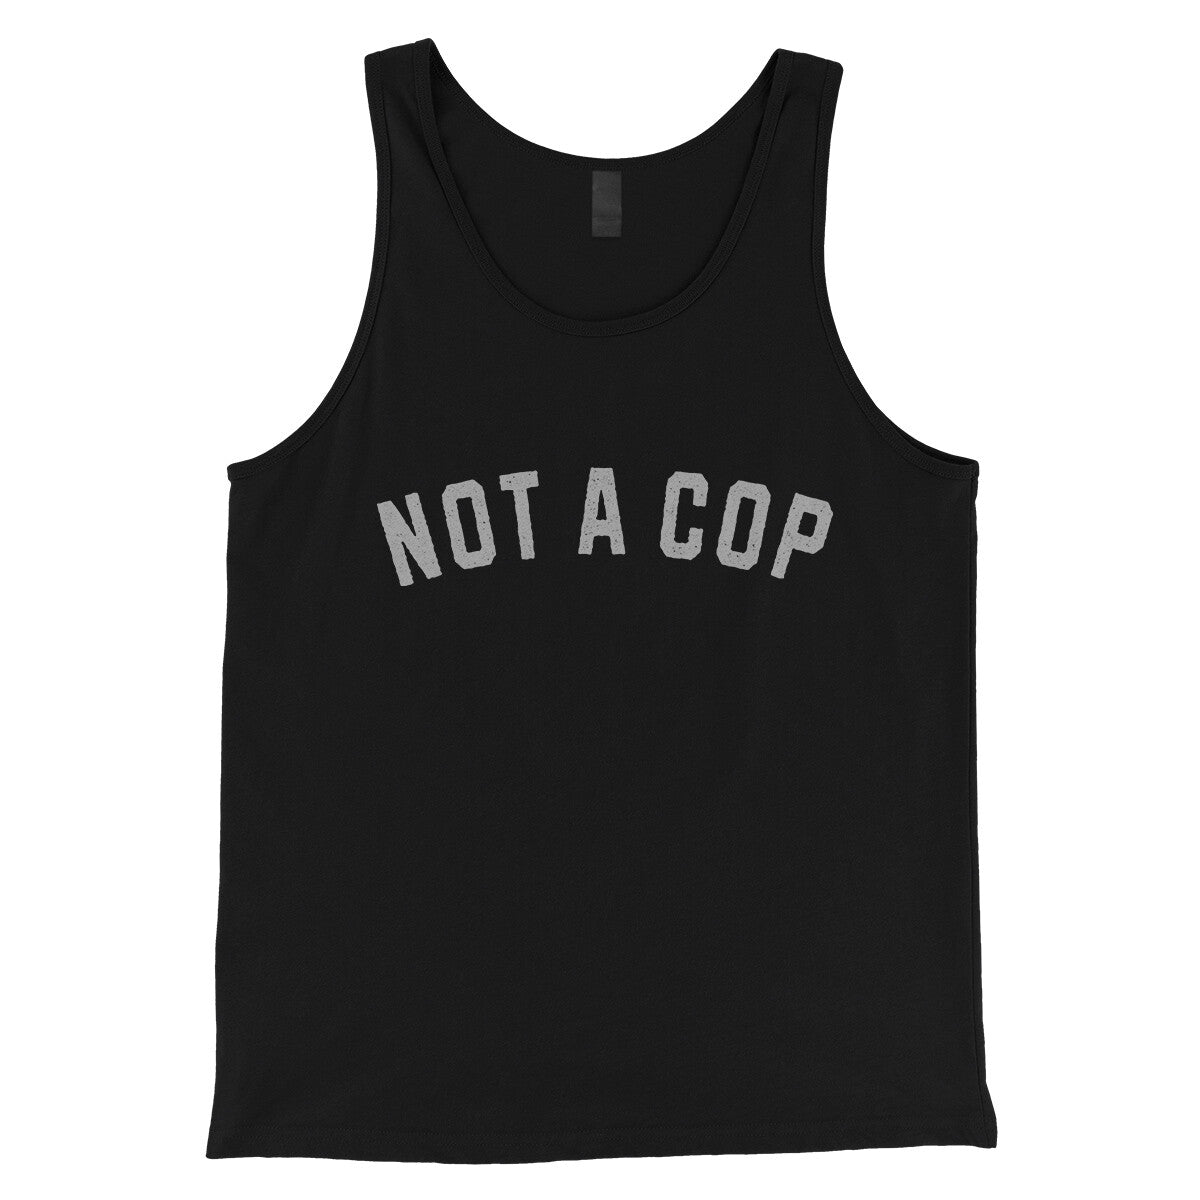 Not a Cop in Black Color